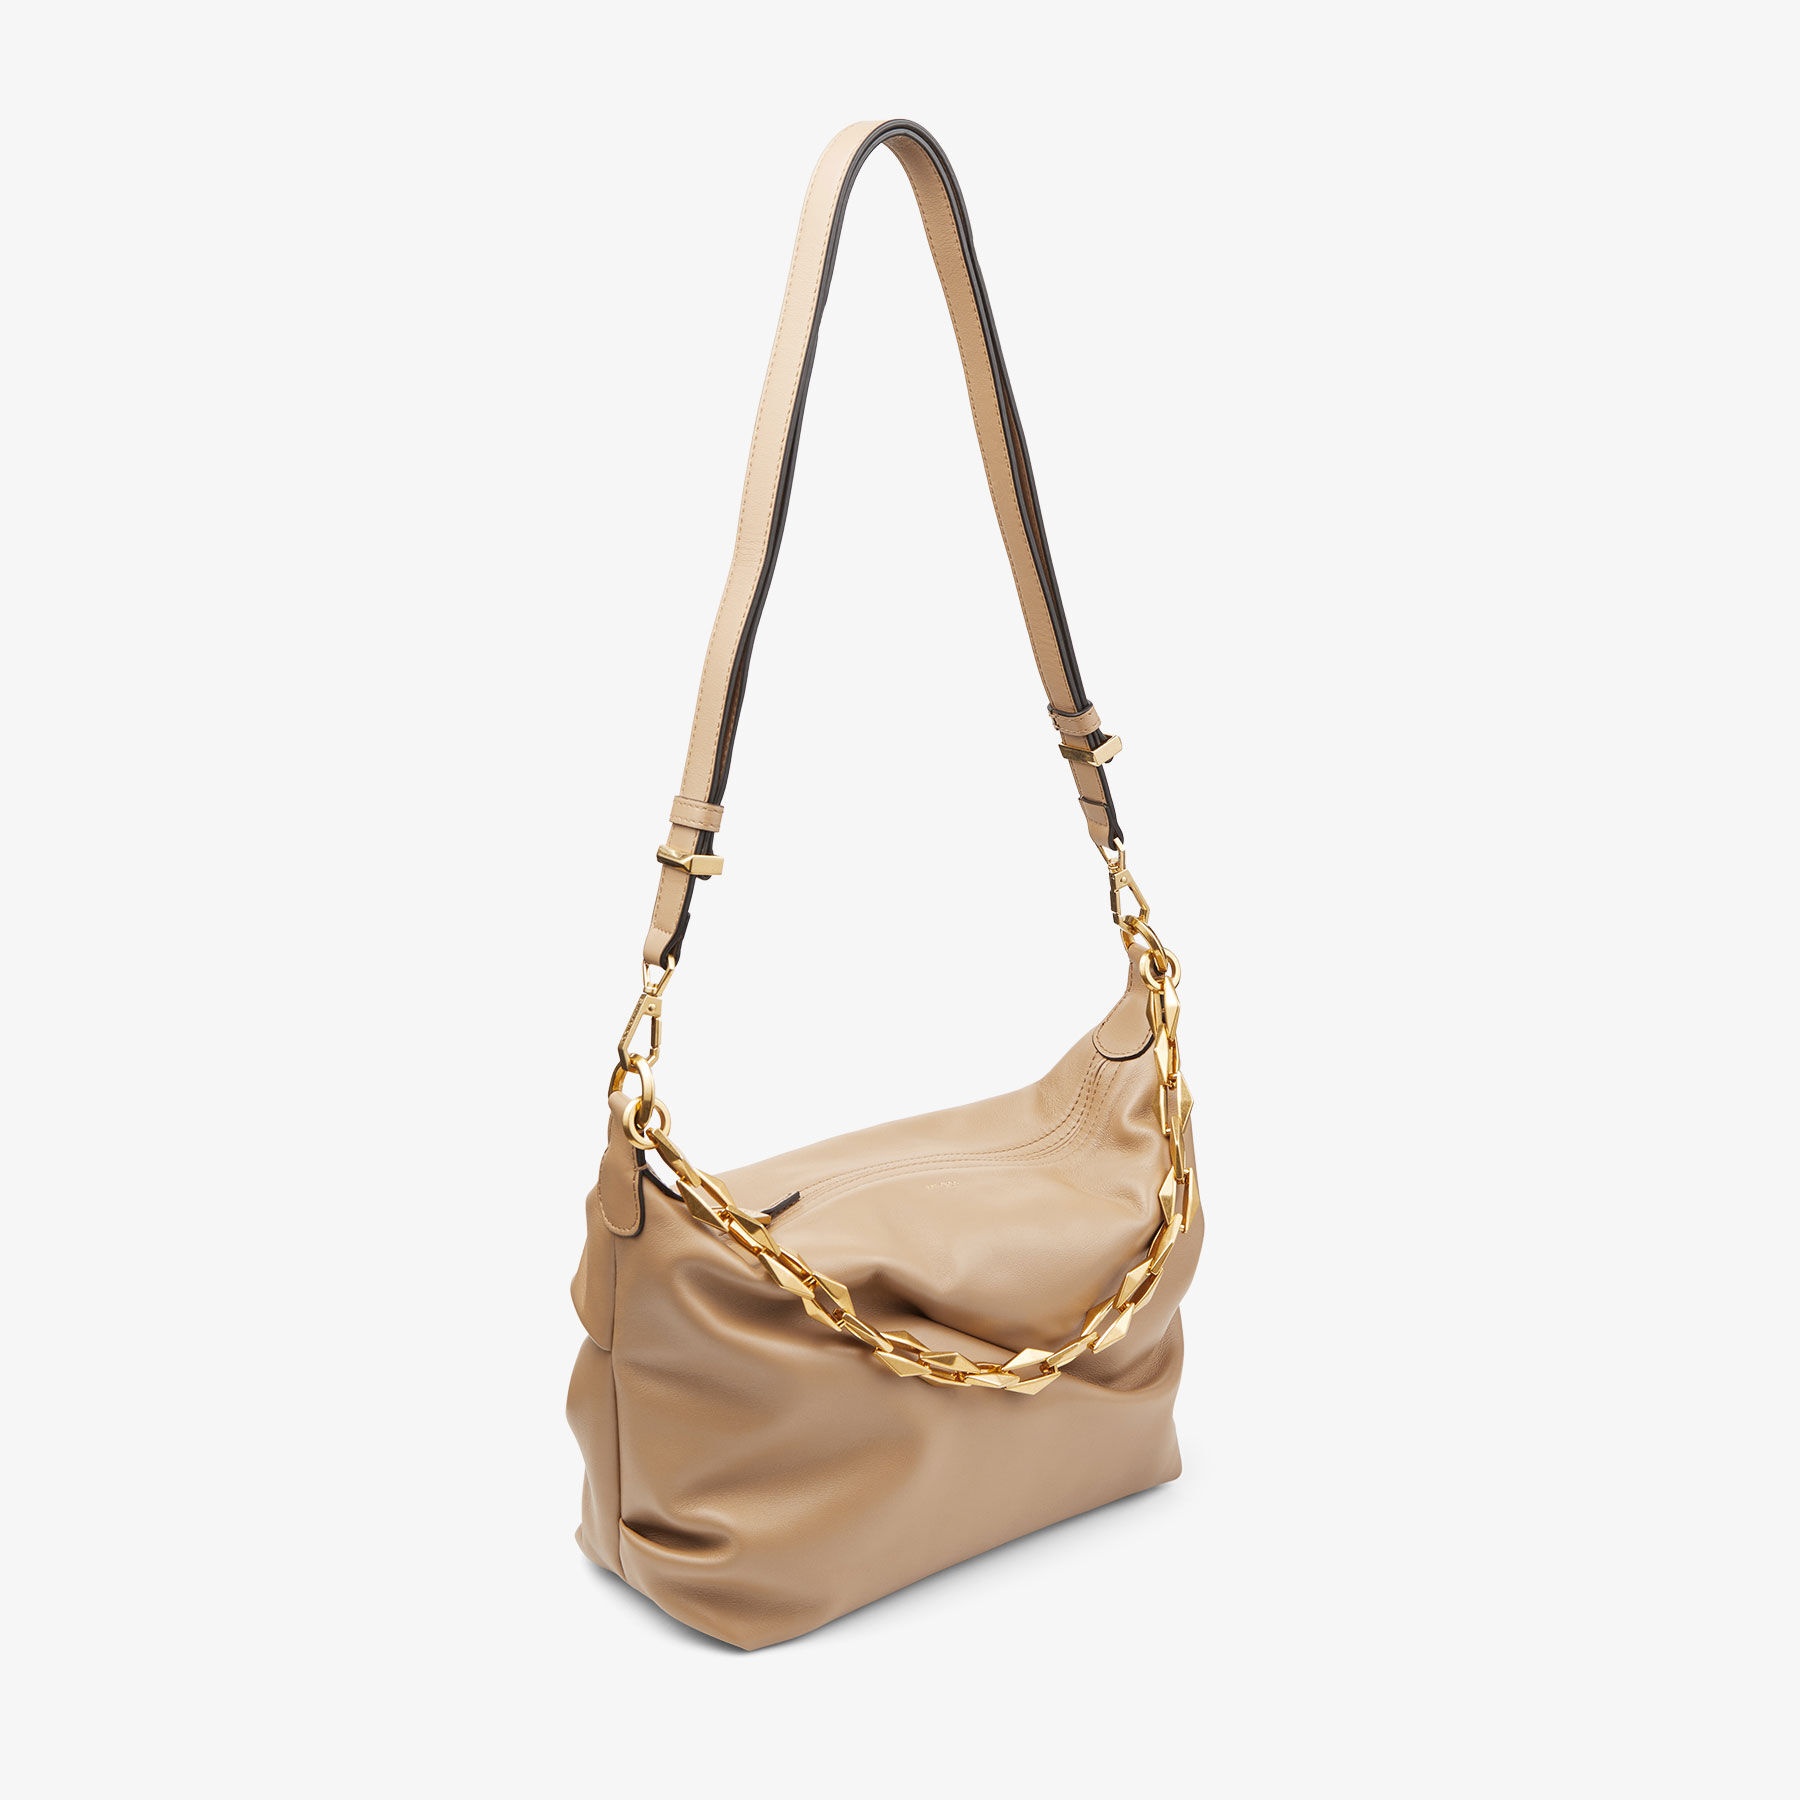 Diamond Soft Hobo/S
Biscuit Calf Leather Hobo Bag with Chain Strap - 5